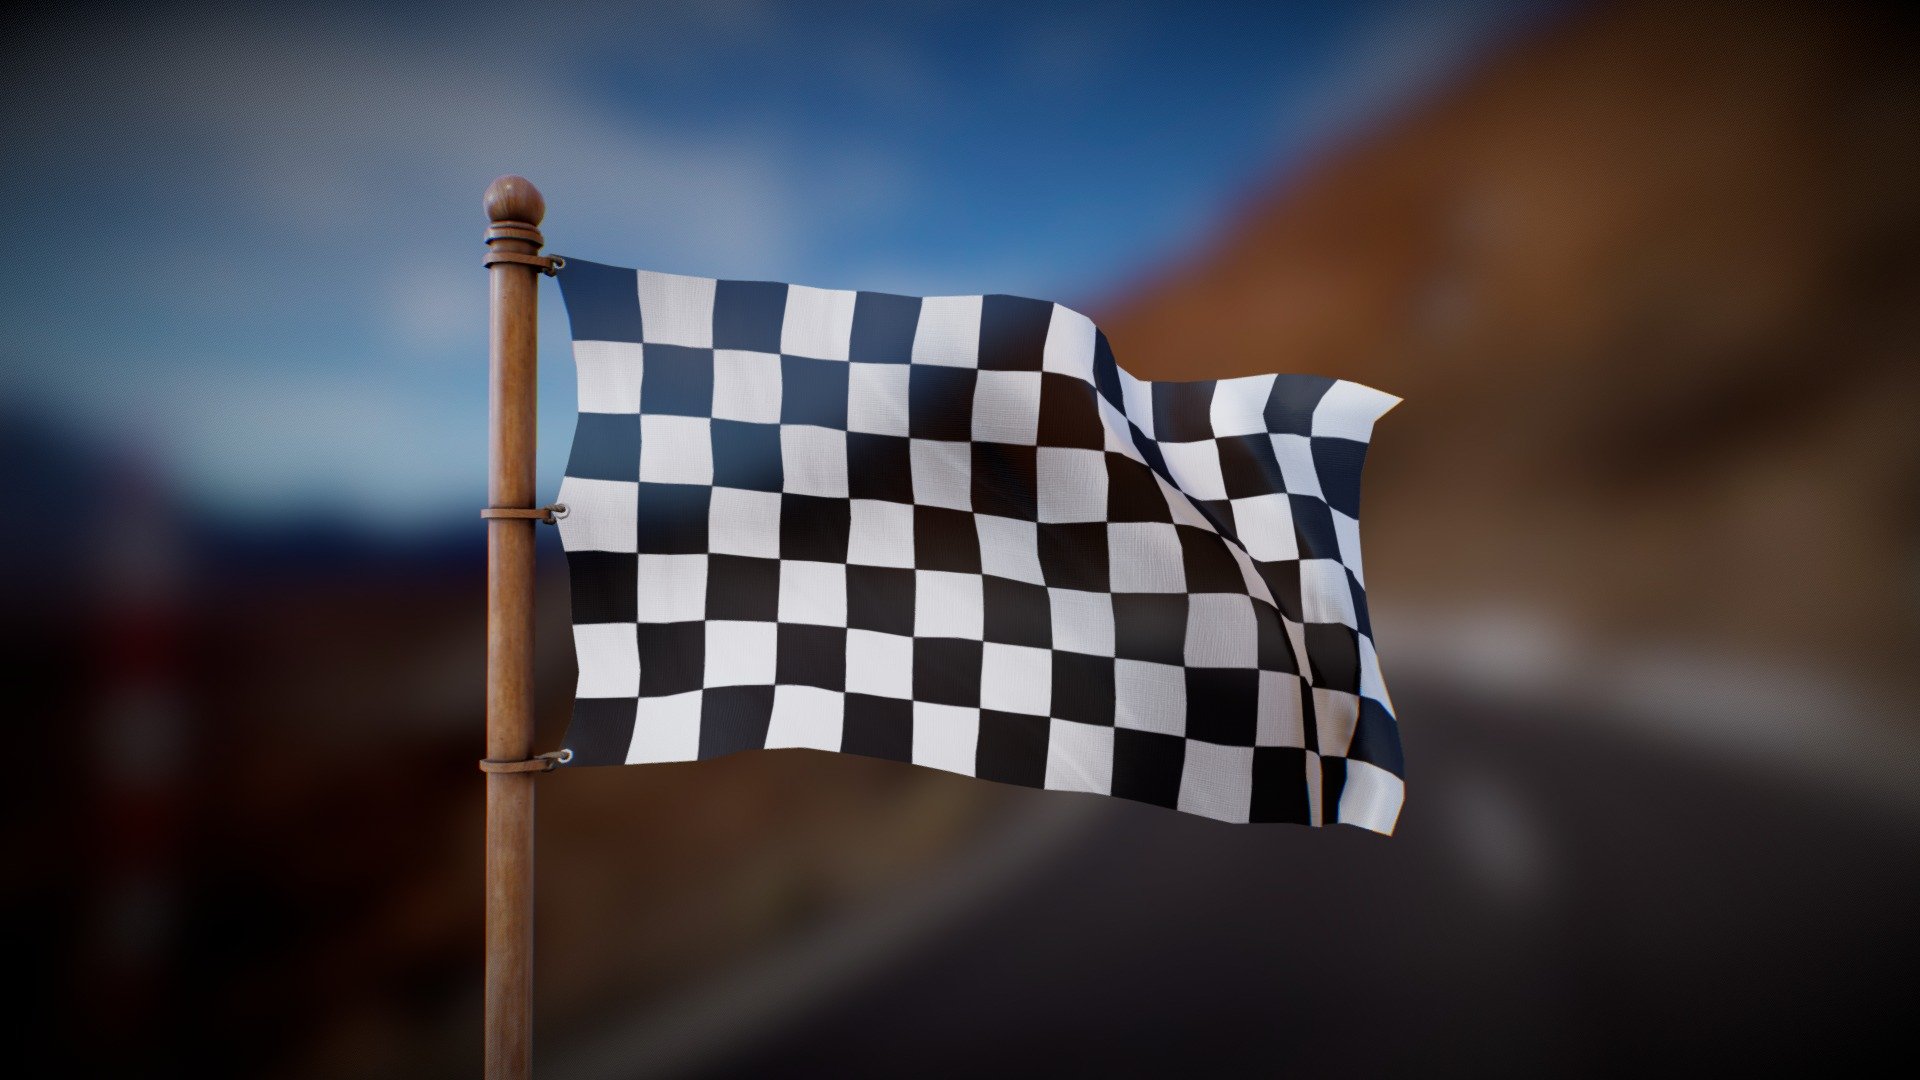 Flag waving in the wind in a looped animation

Joint Animation, perfect for any purpose
4K PBR textures

Feel free to DM me for anu question of custom requests :) - Racing Flag - Wind Animated Loop - Buy Royalty Free 3D model by Deftroy 3d model